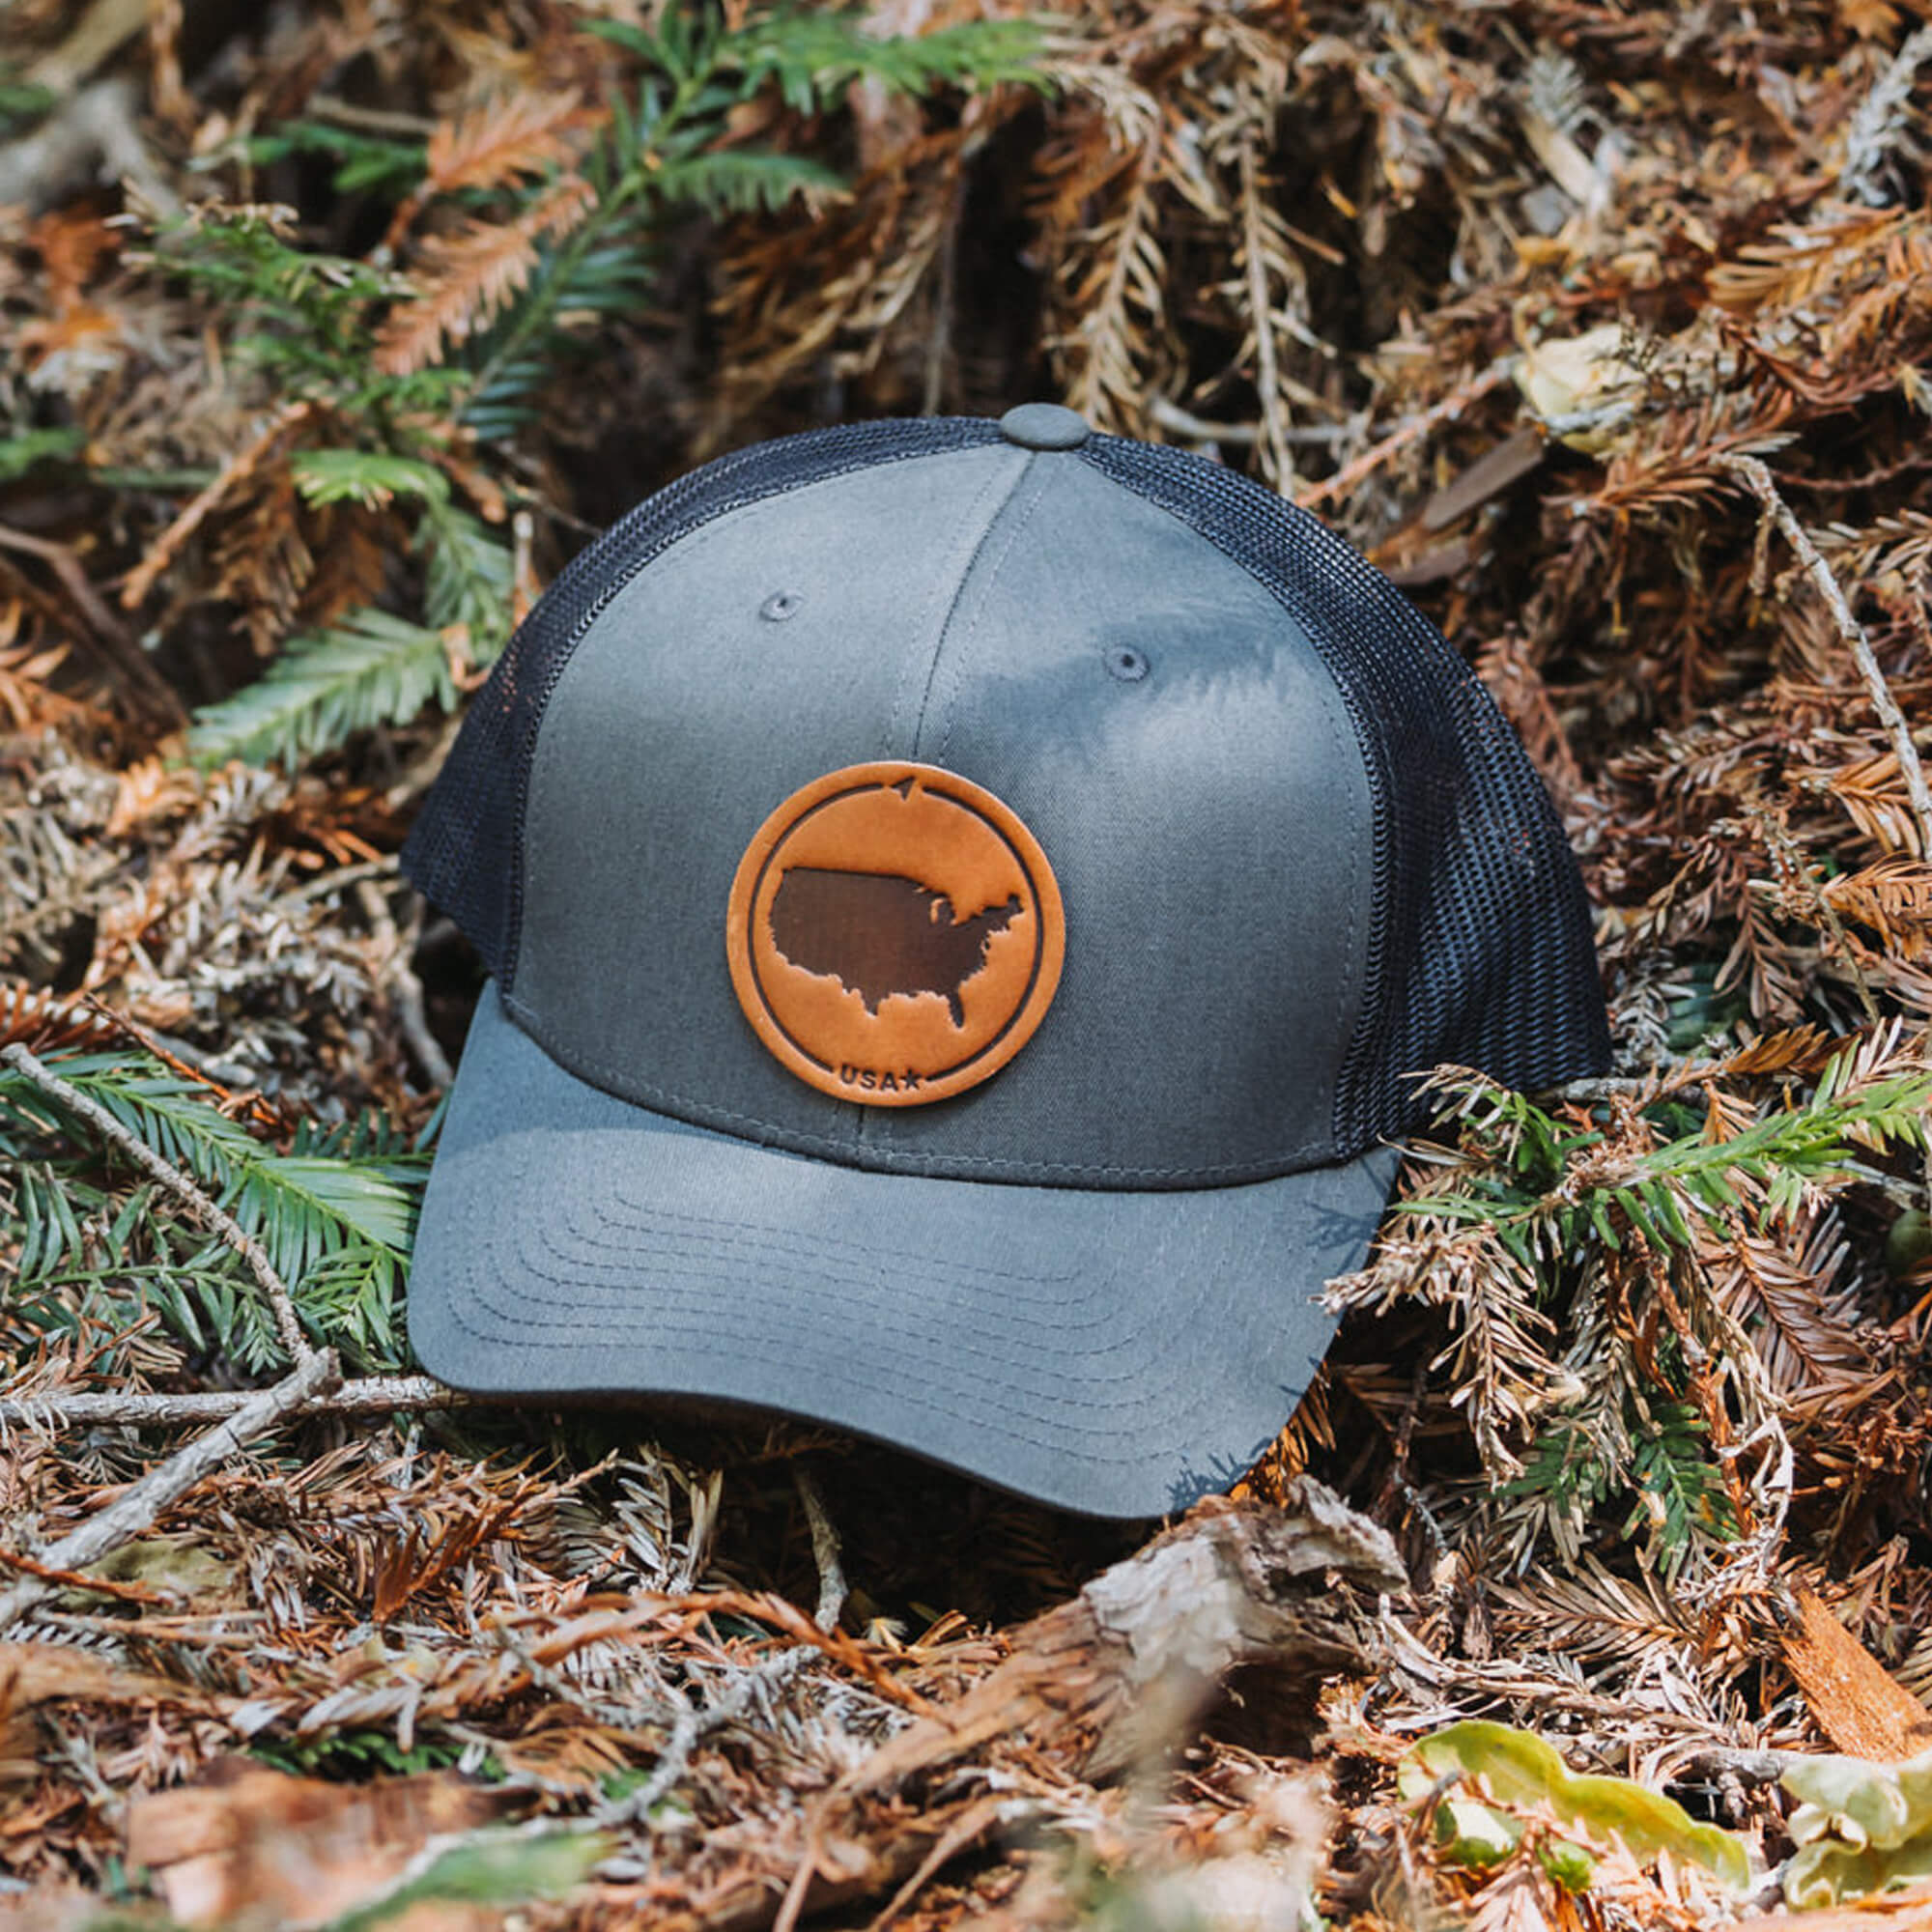 Charcoal trucker hat with full-grain leather patch of USA | BLACK-003-001, CHARC-003-001, NAVY-003-001, HGREY-003-001, MOSS-003-001, BROWN-003-001